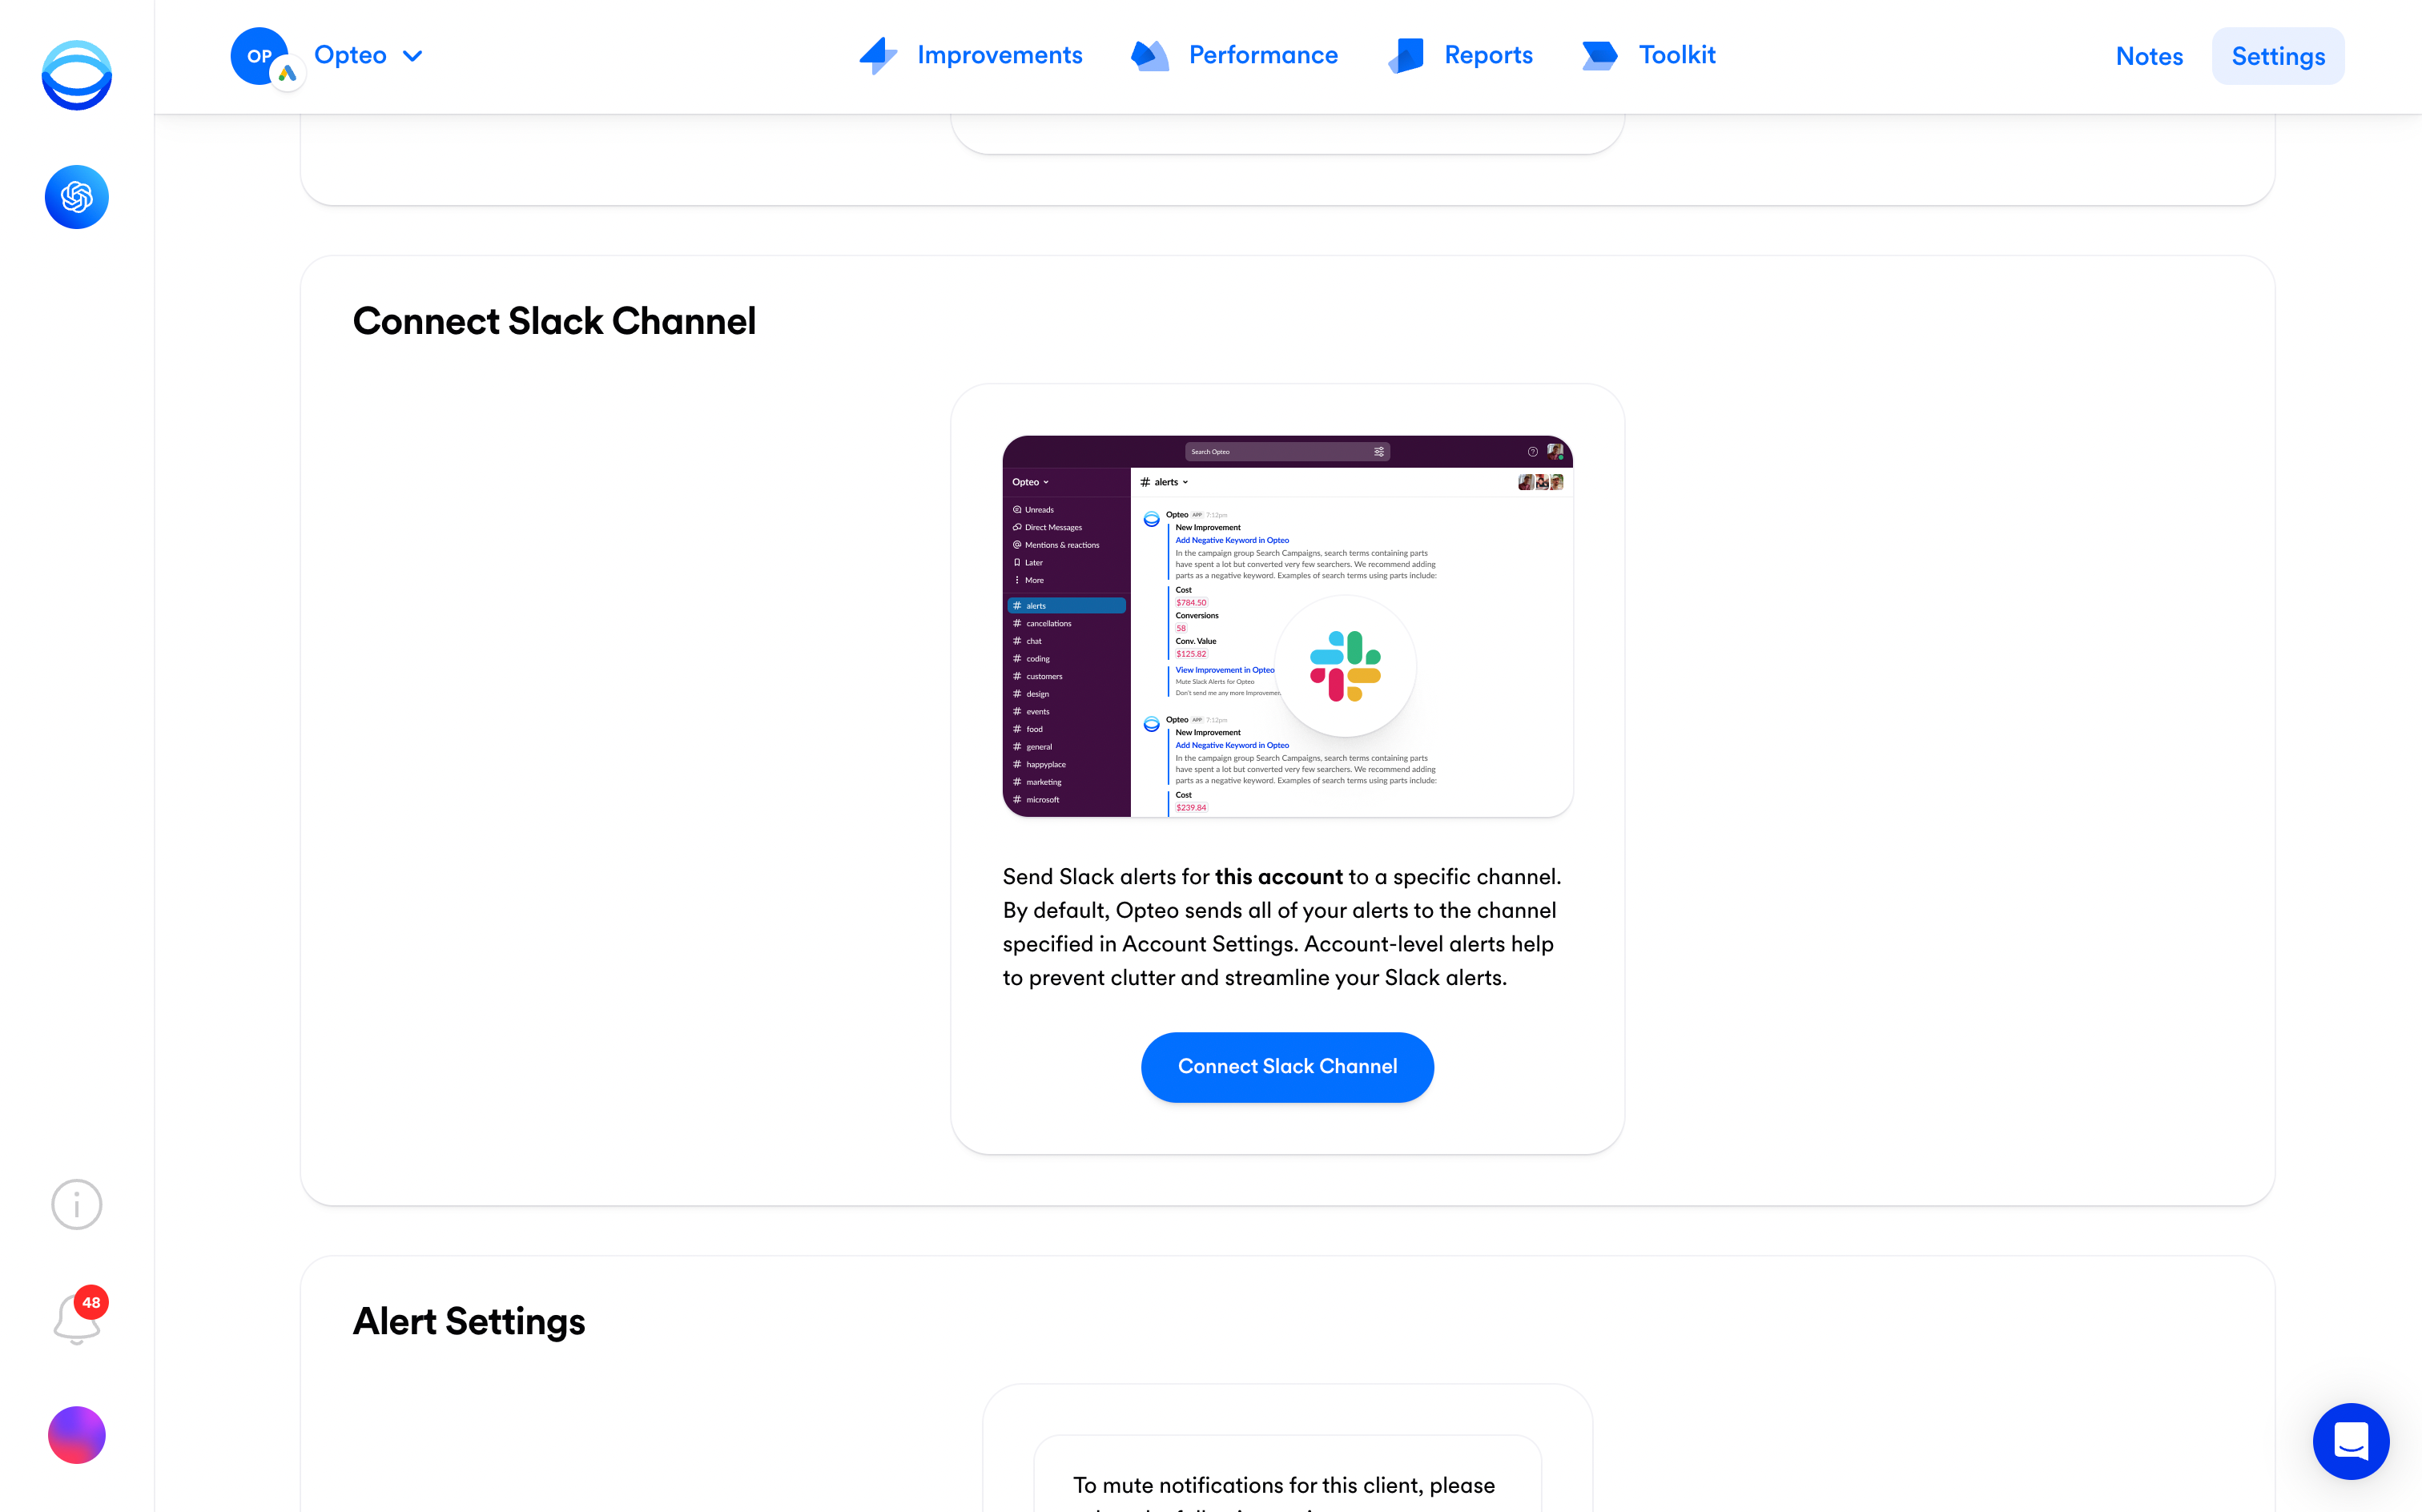 Screenshot of the "Connect Slack Channel" section in Opteo.